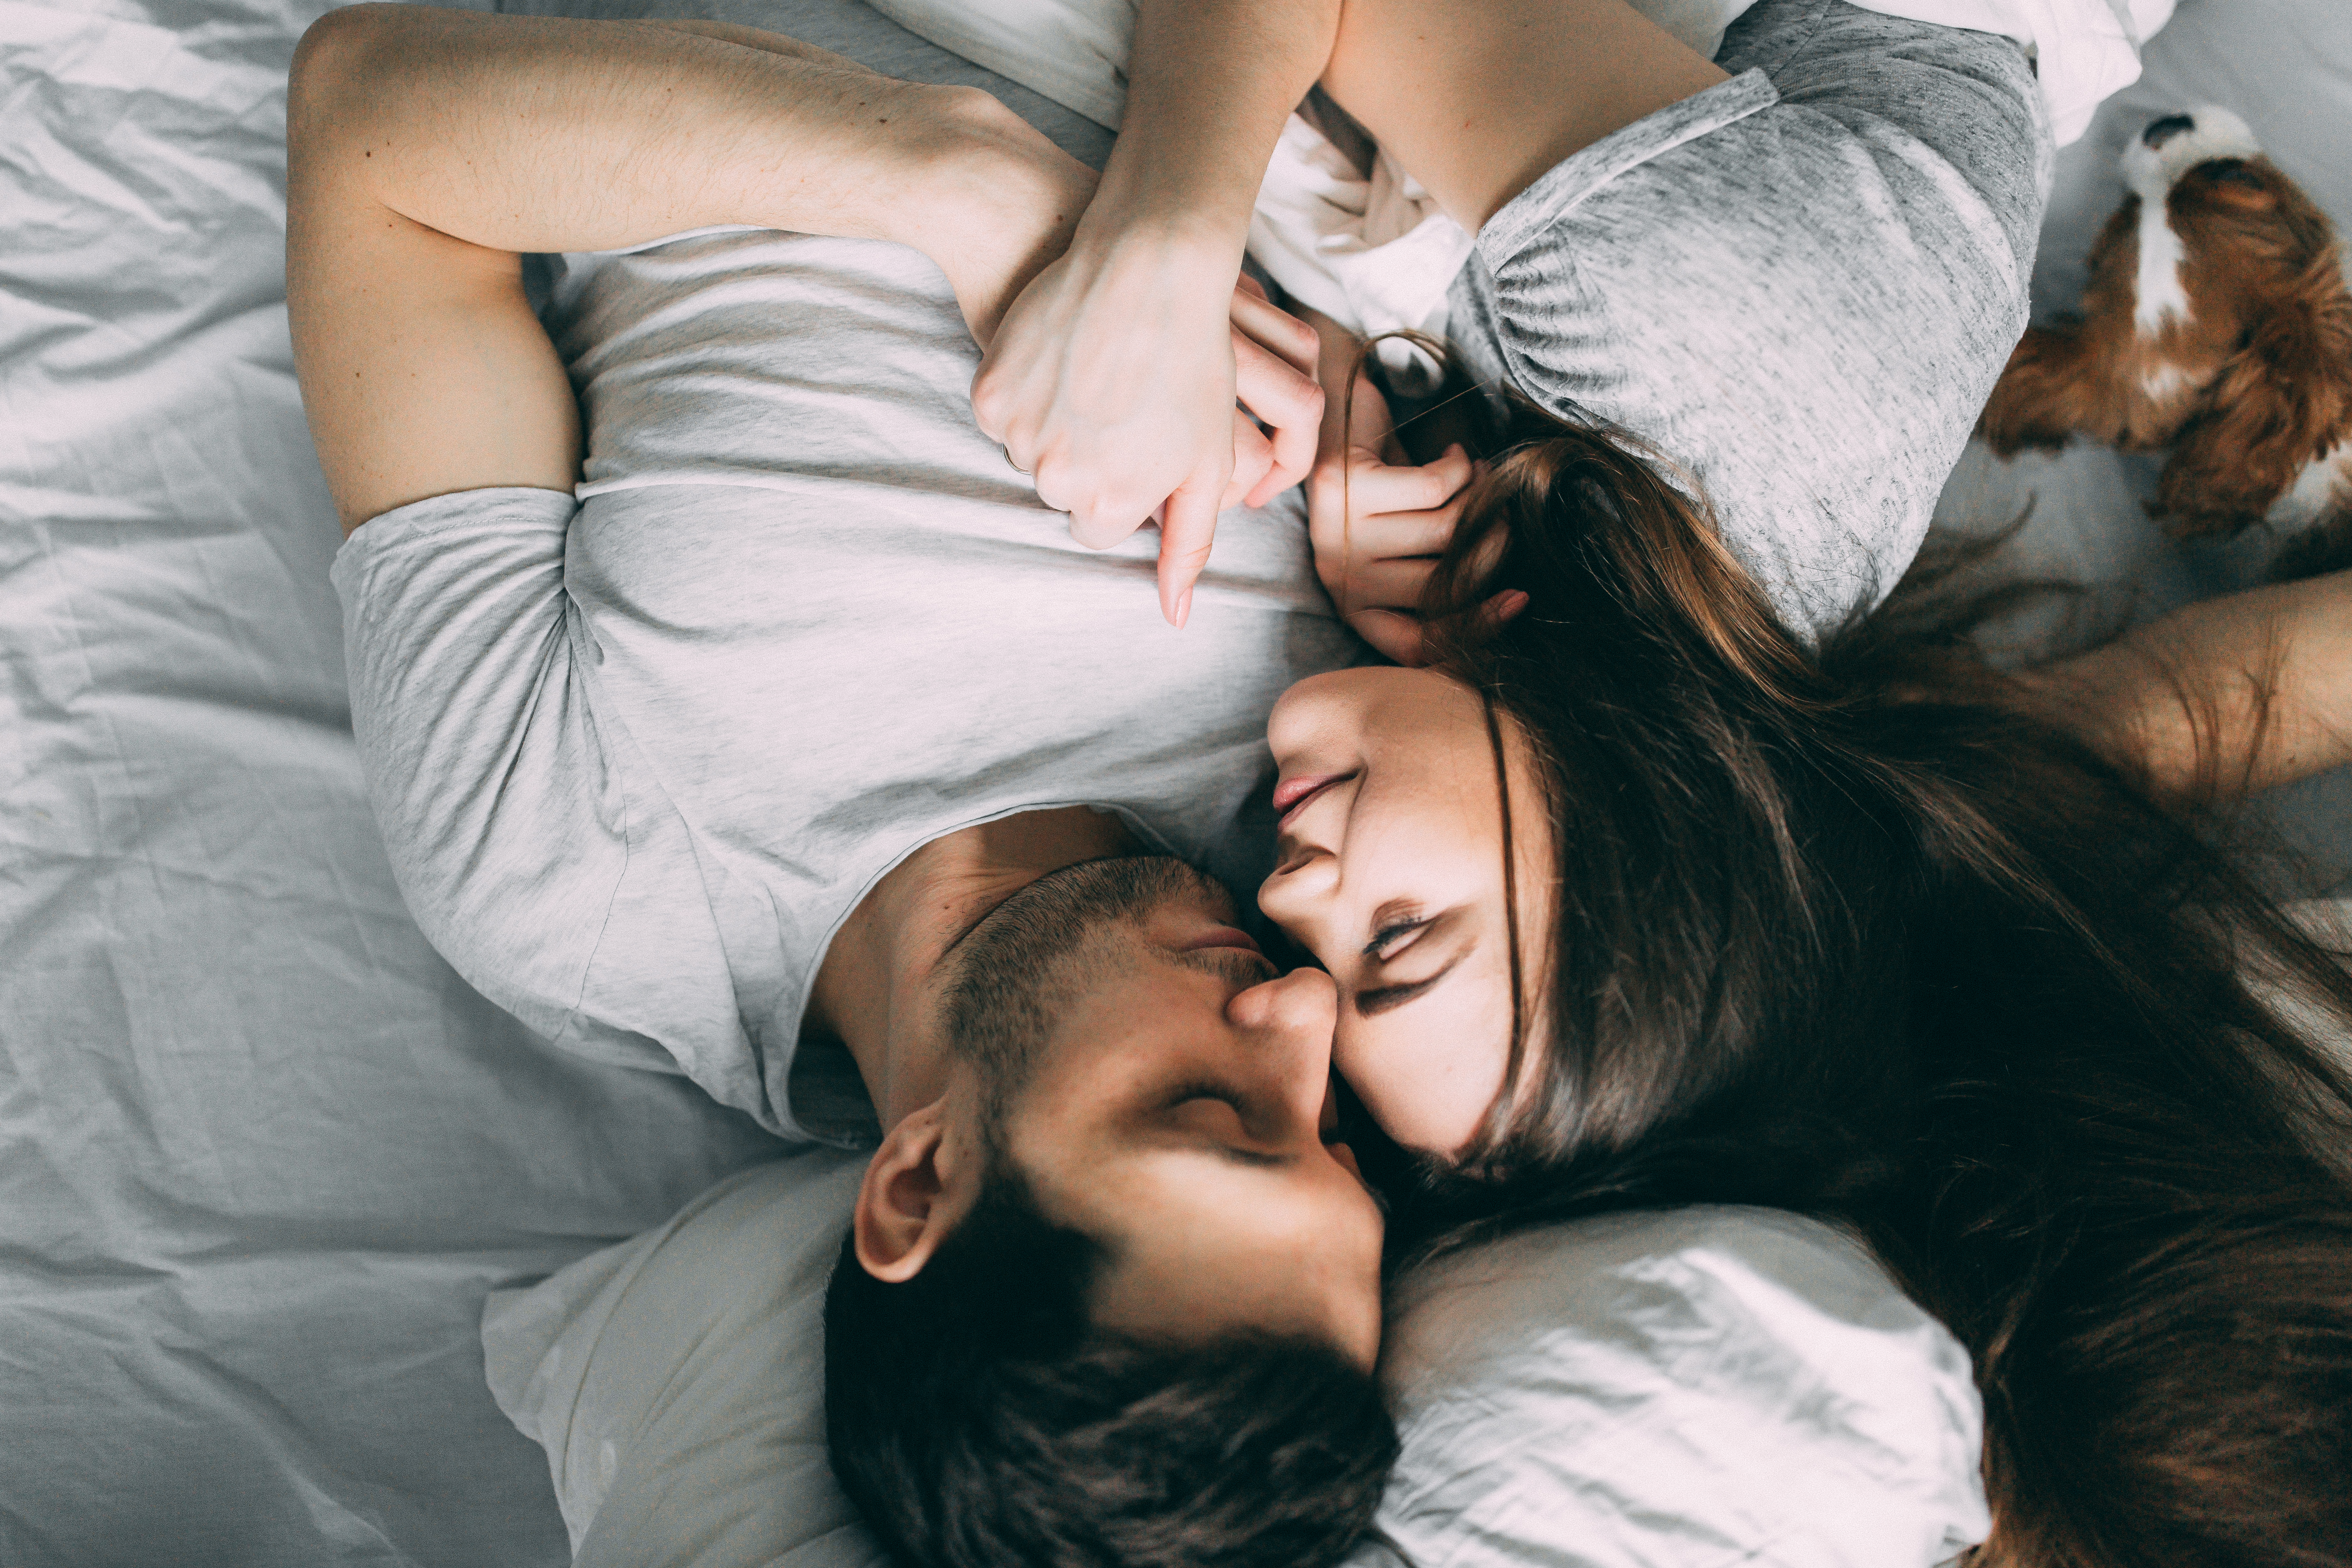 An upside-down photo of a man and woman cuddling in bed | Source: Shutterstock